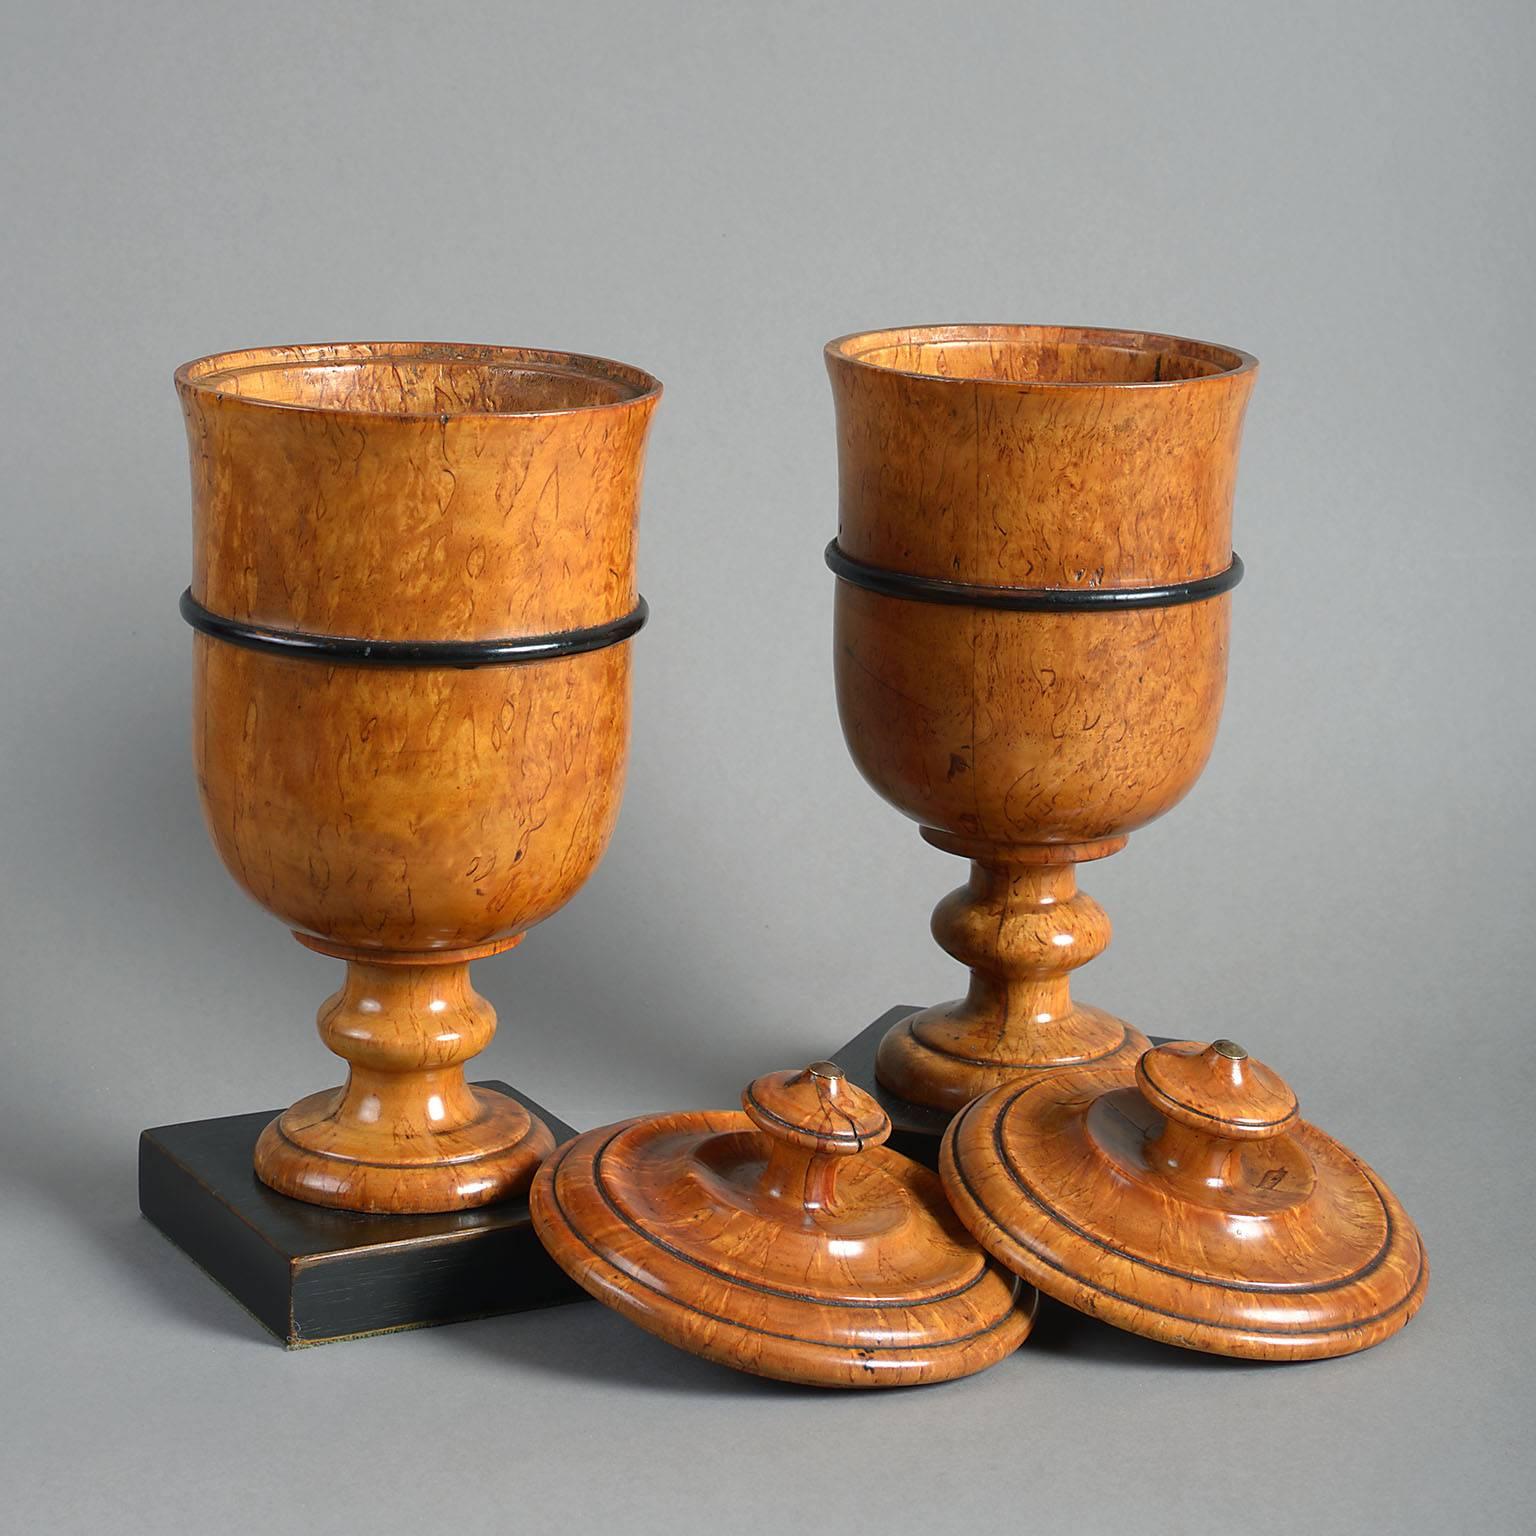 The highly figured Masur Birch lathe-turned in the form of goblets with knopped stems with ebonized bands below removable covers and standing on ebonized block bases.

Masur or Karelian Birch was used extensively in Biedermeier furniture because